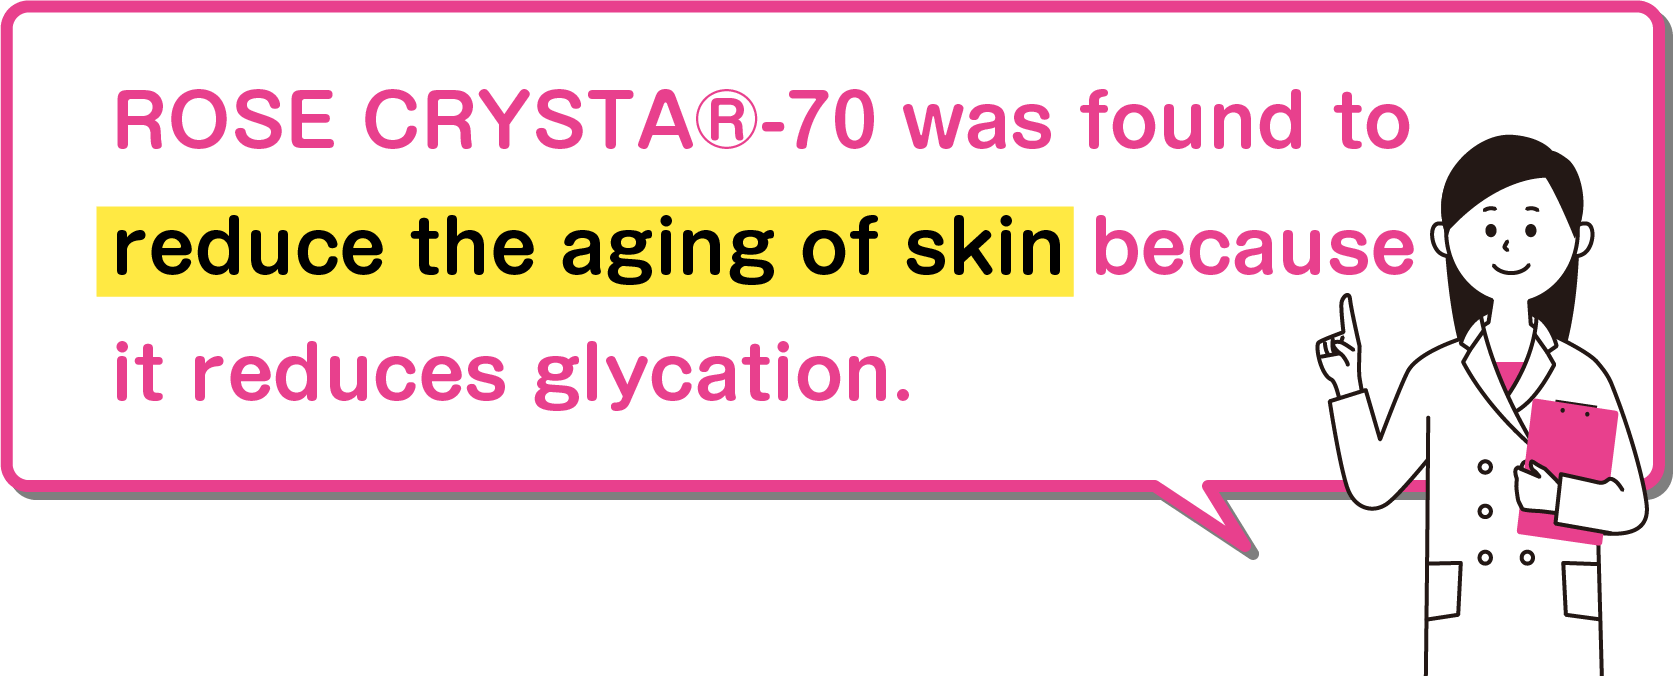 ROSE CRYSTA®-70 was found to reduce the aging of skin because it reduces glycation.